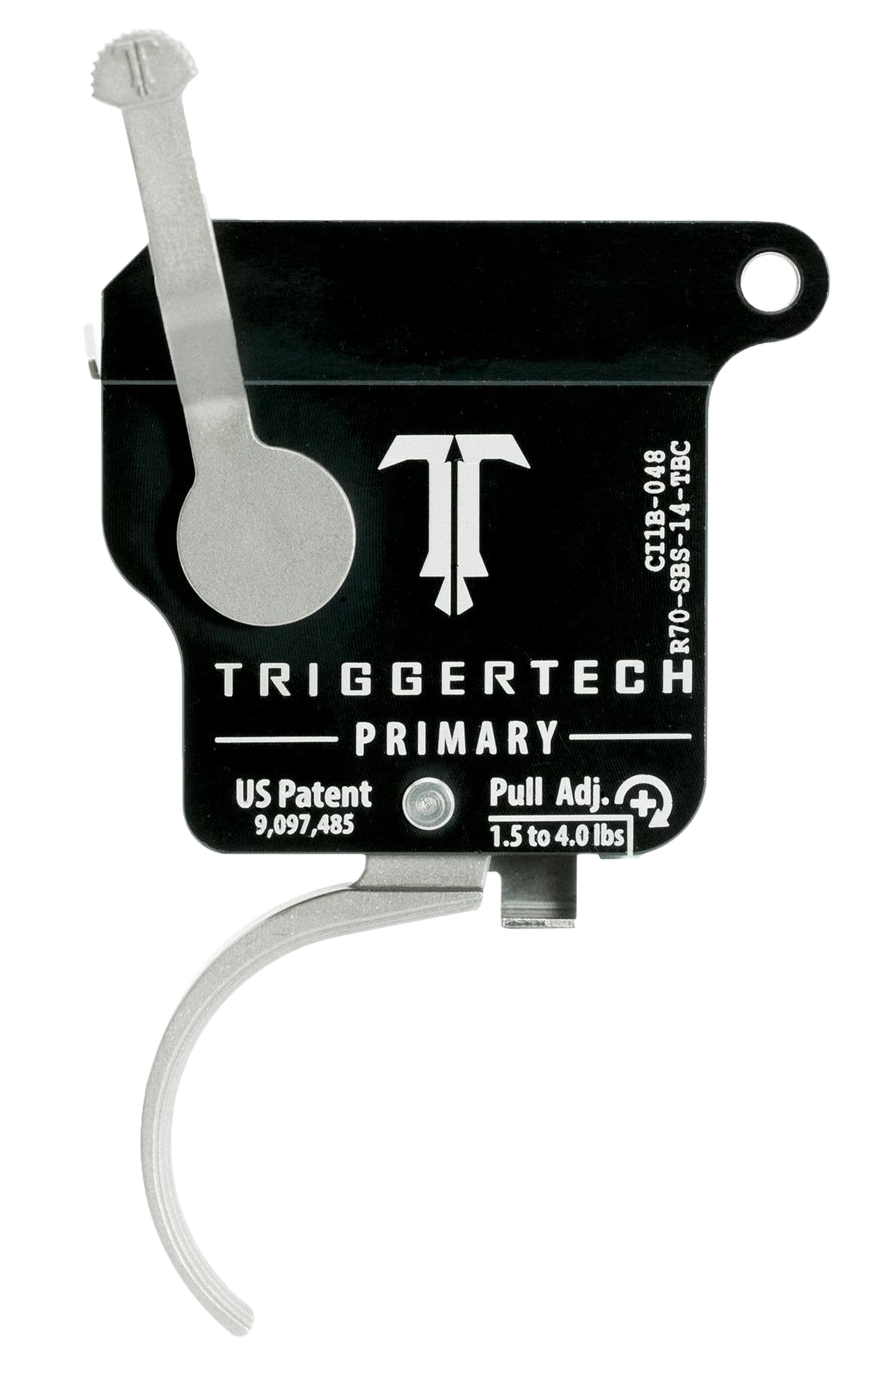 Triggertech Rem 700 Primary Single Stage Triggers Factory Stainless Traditional Curved Top Safety Rh